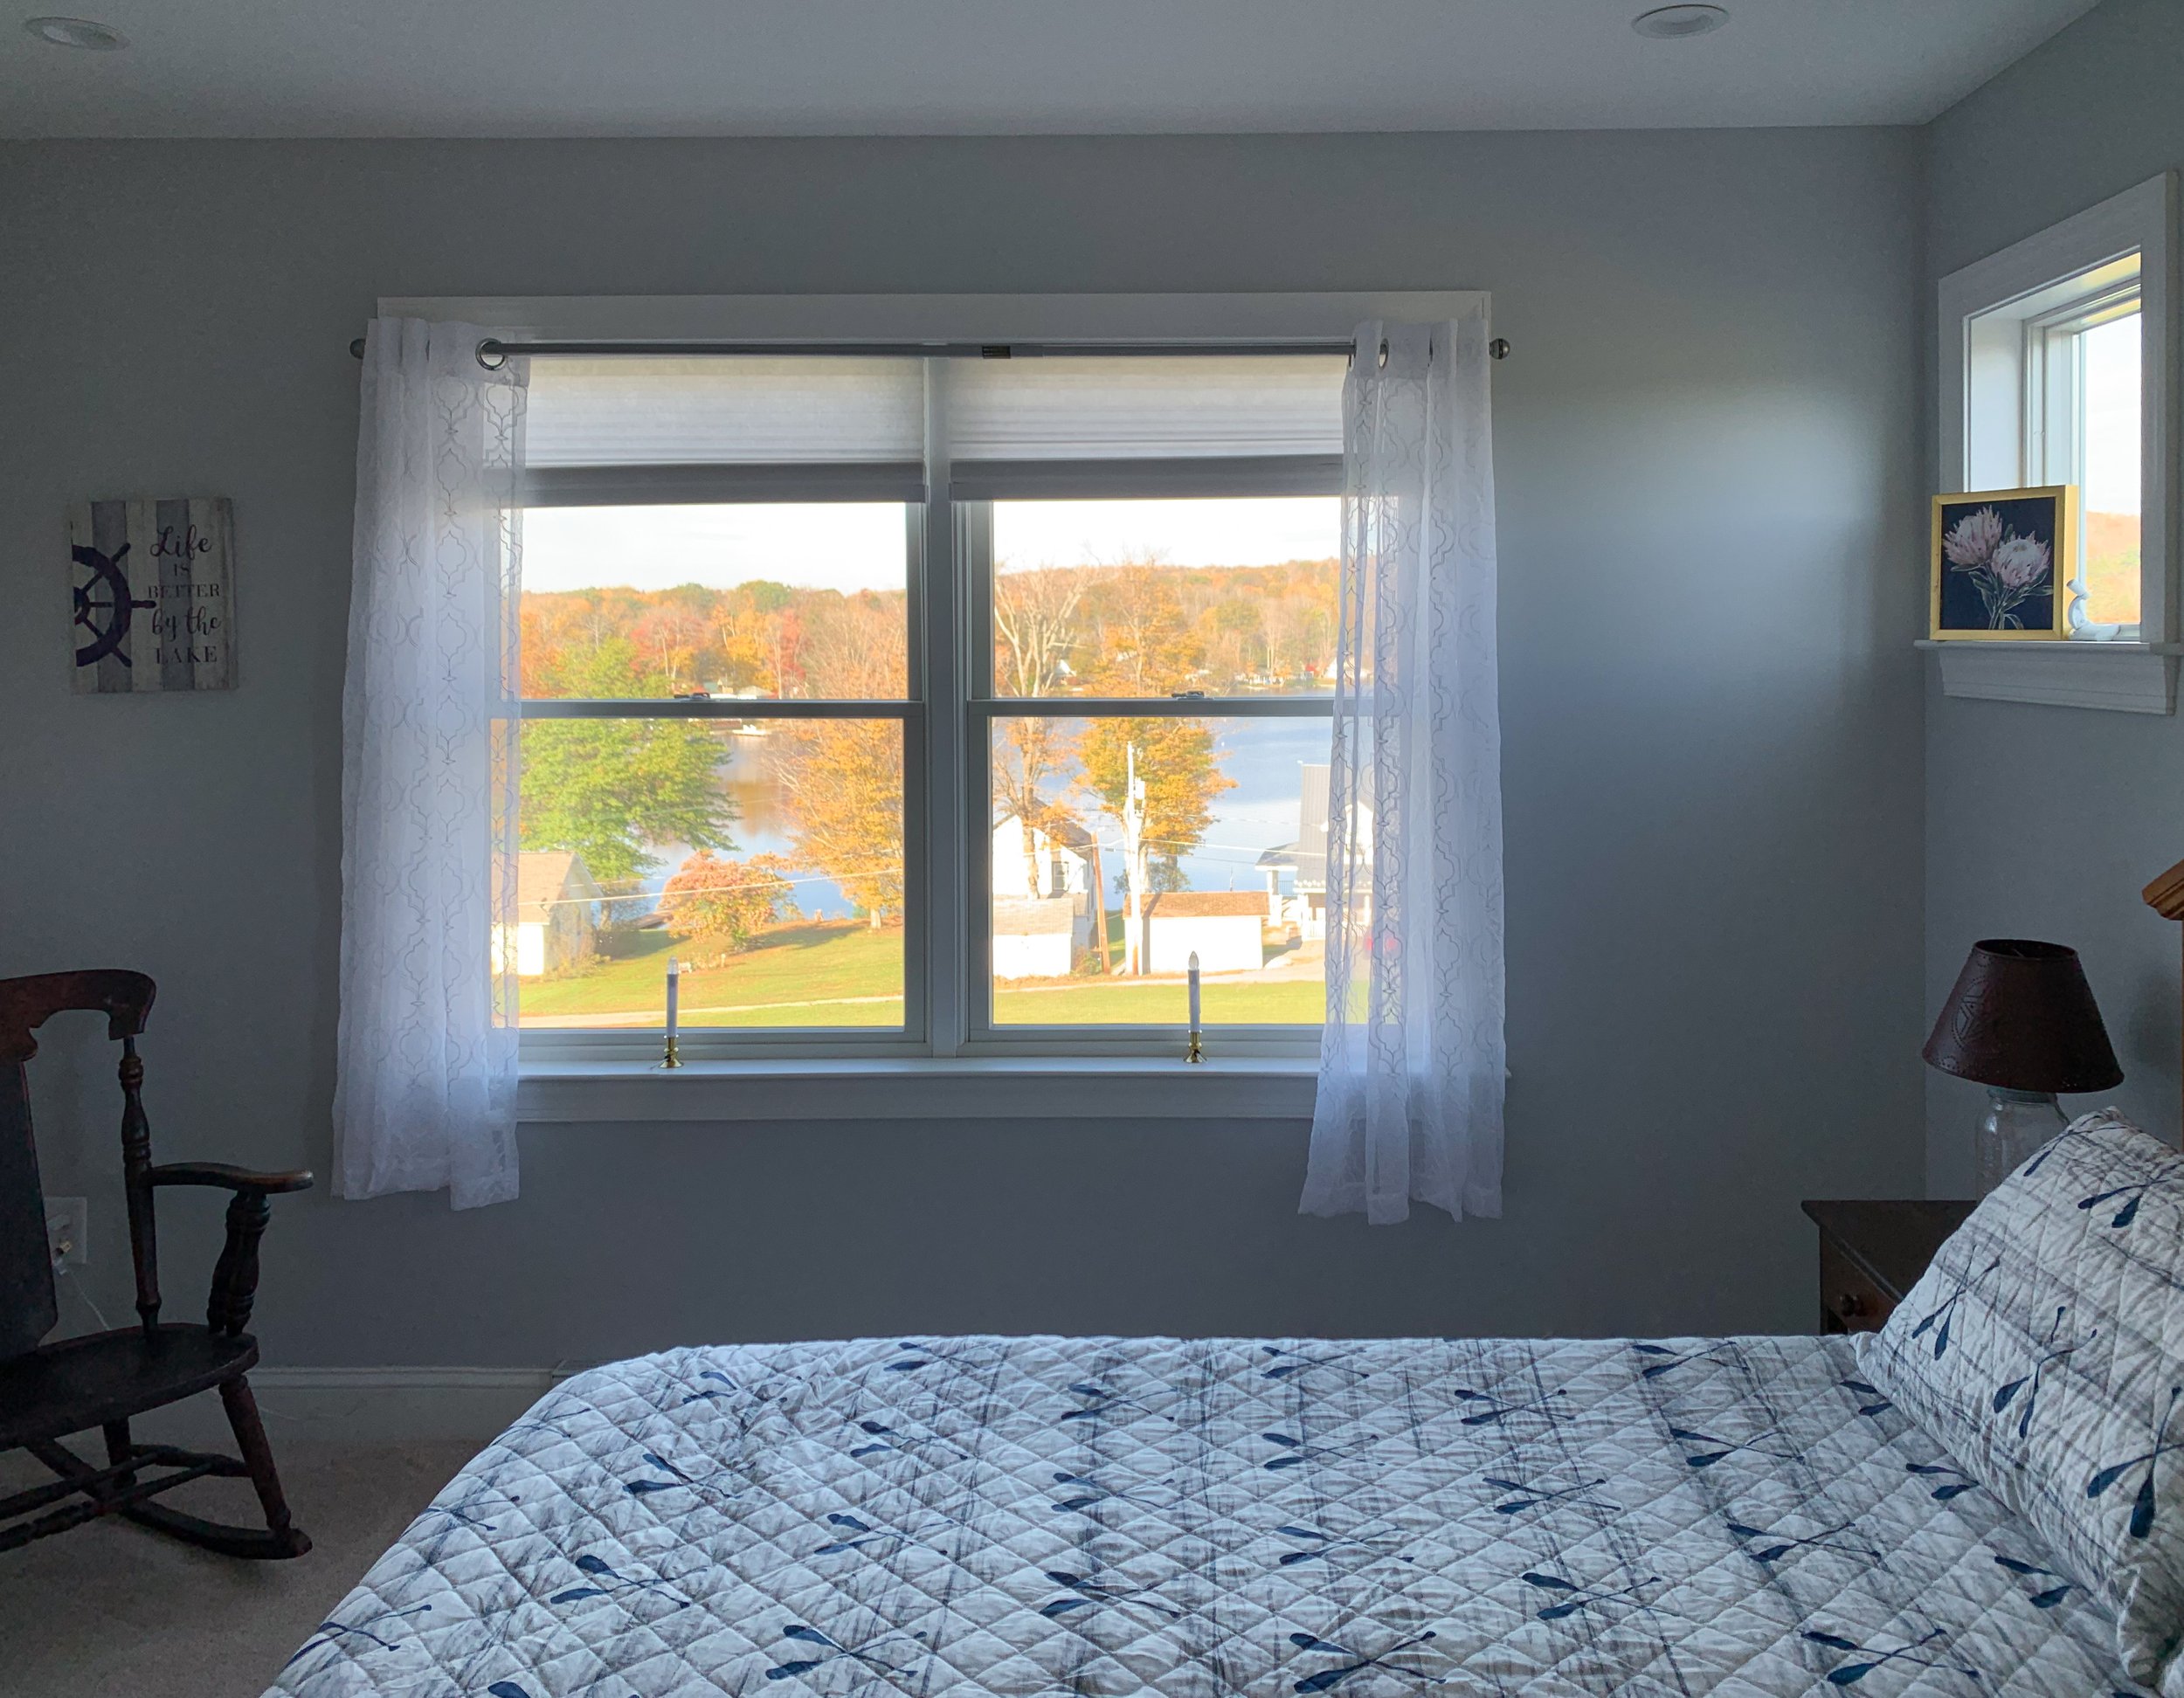 Lake house guest bedroom interior design fall colors.JPEG